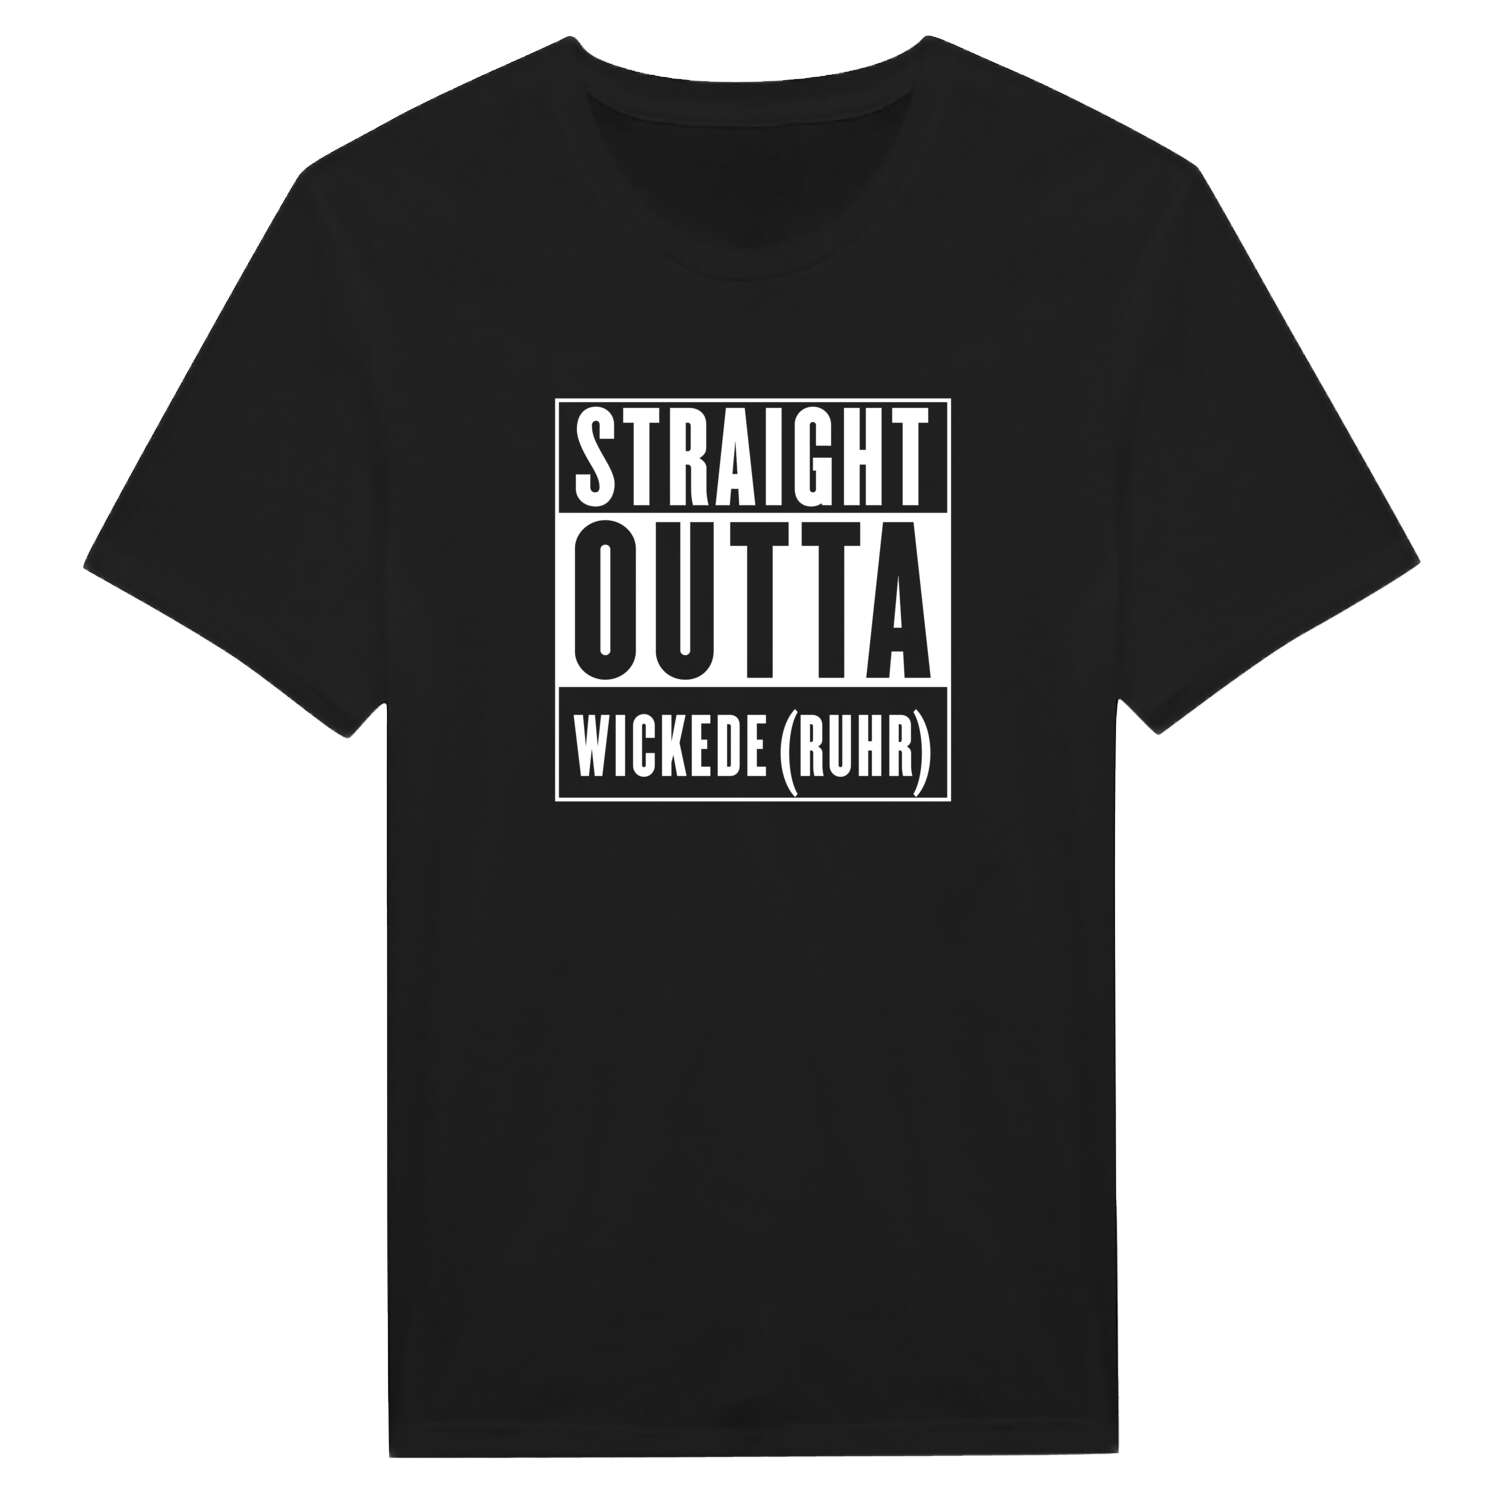 Wickede (Ruhr) T-Shirt »Straight Outta«